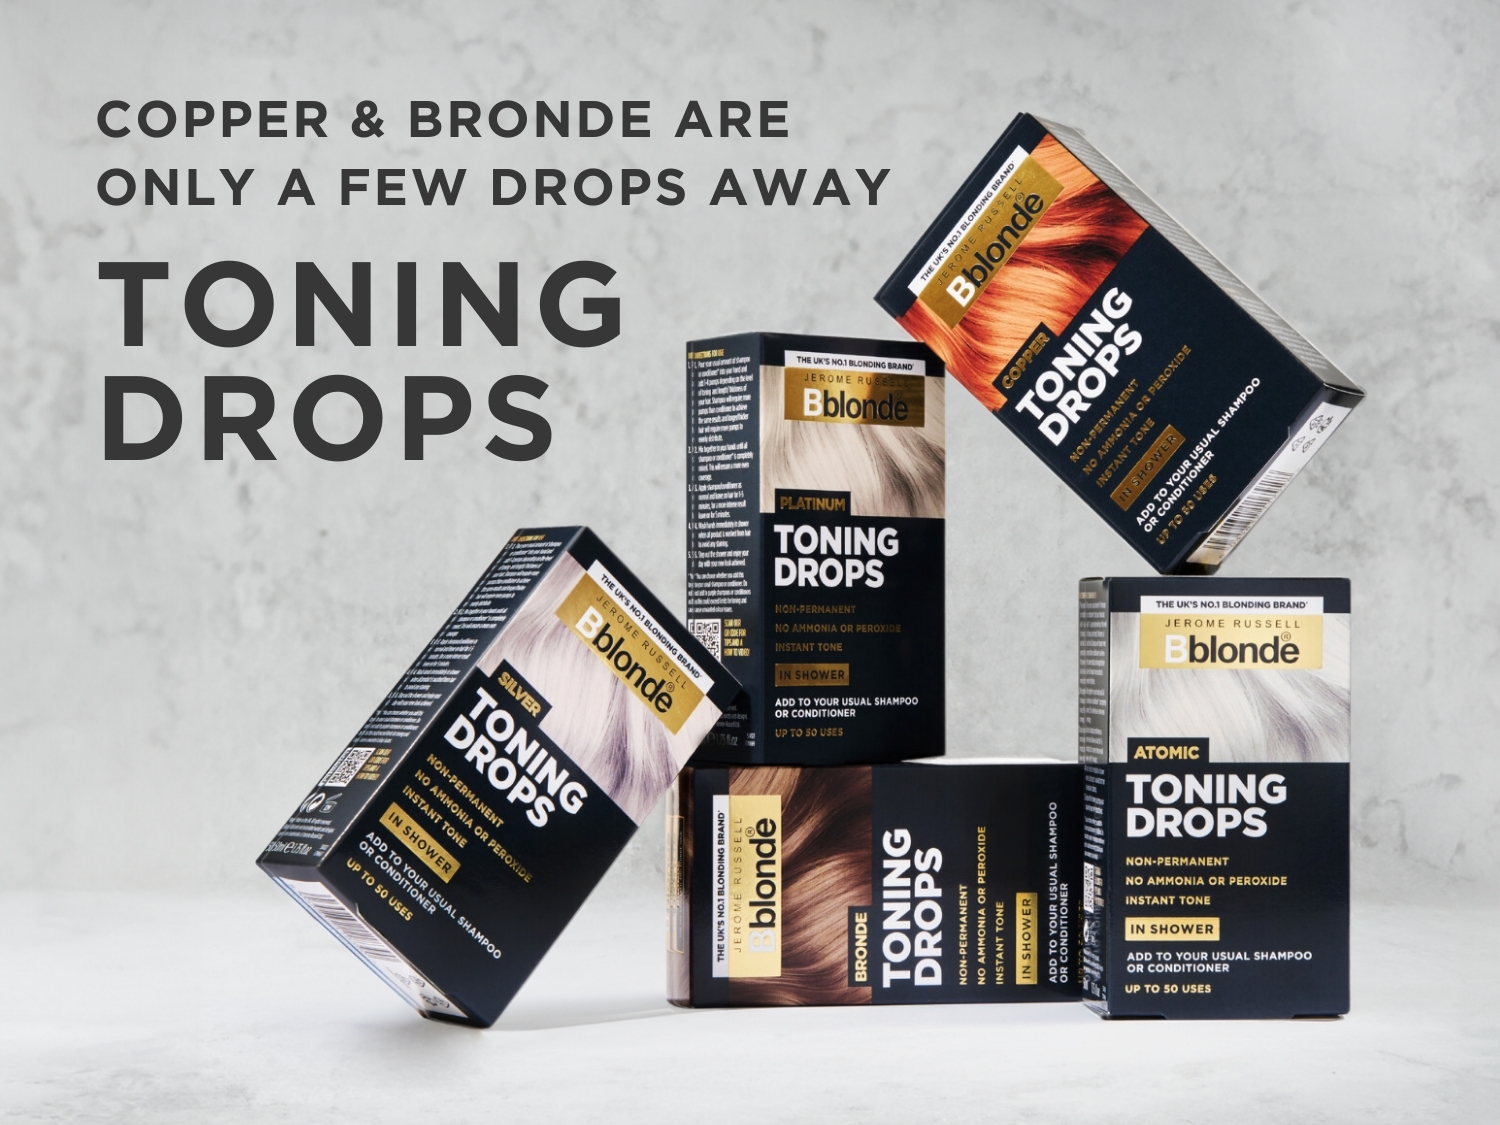 Introducing Toning Drops Copper and Bronde